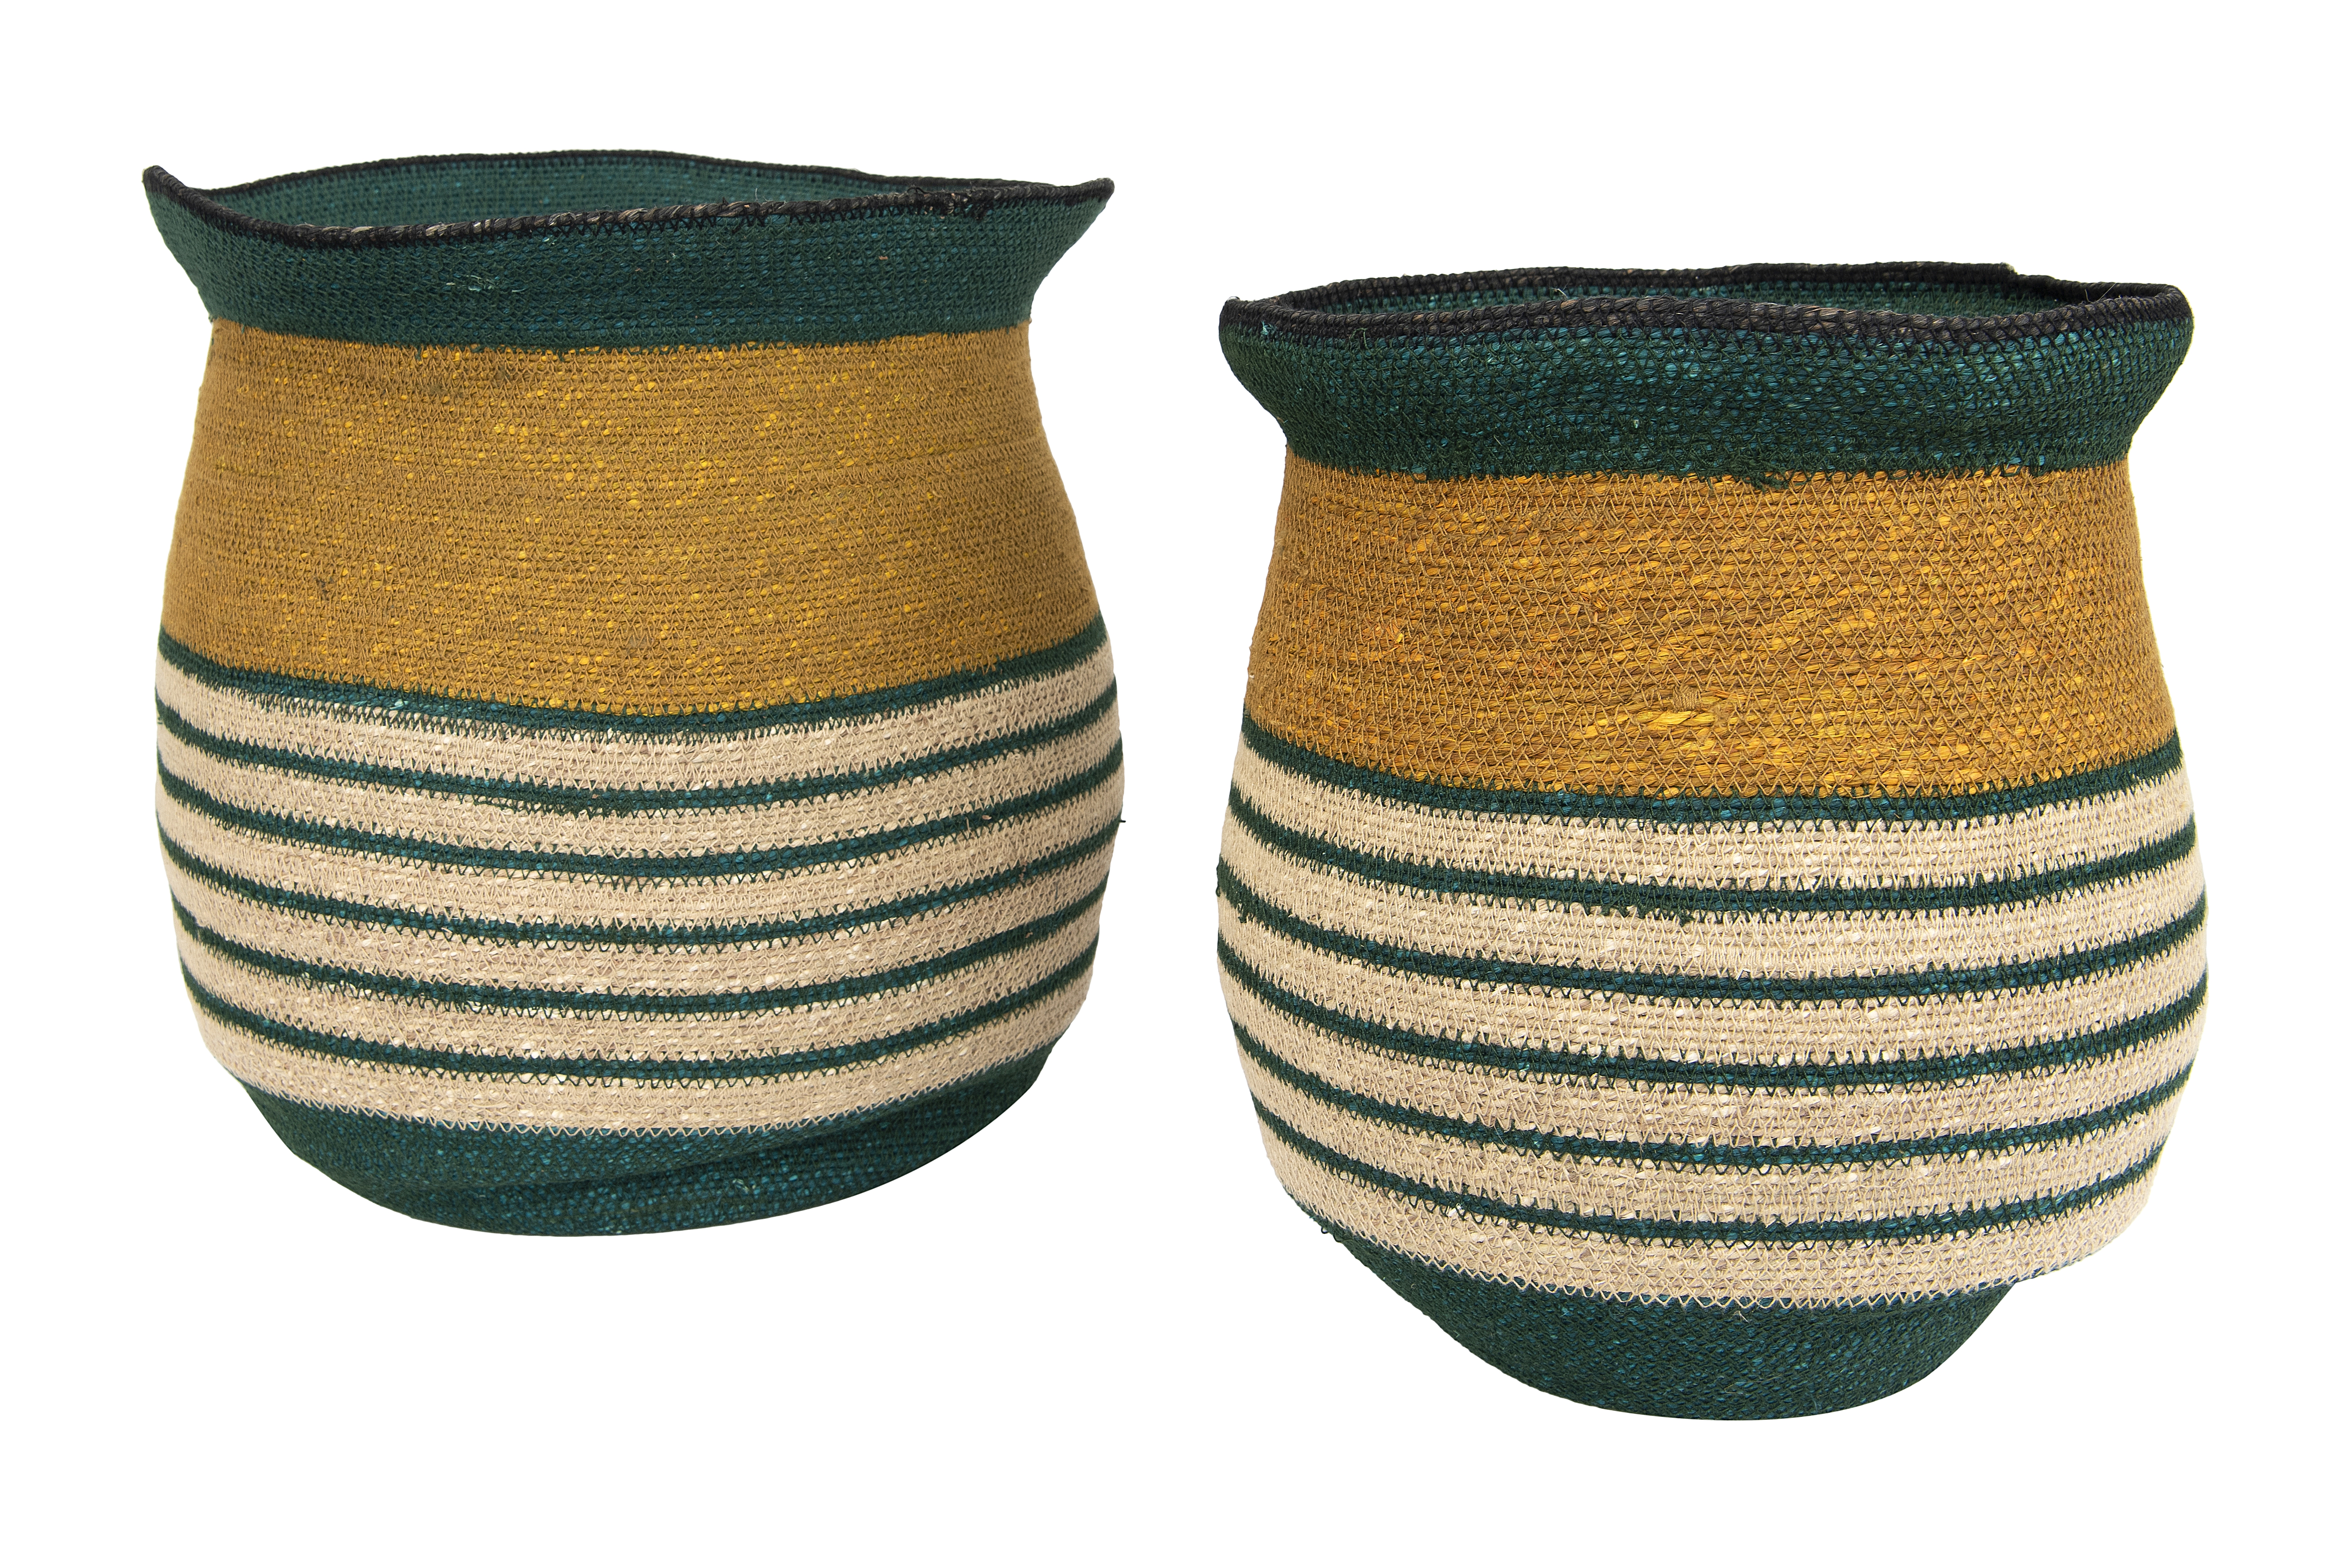 13.25" & 14.25" Handwoven Natural Seagrass Striped Baskets (Set of 2 Sizes) - Image 0